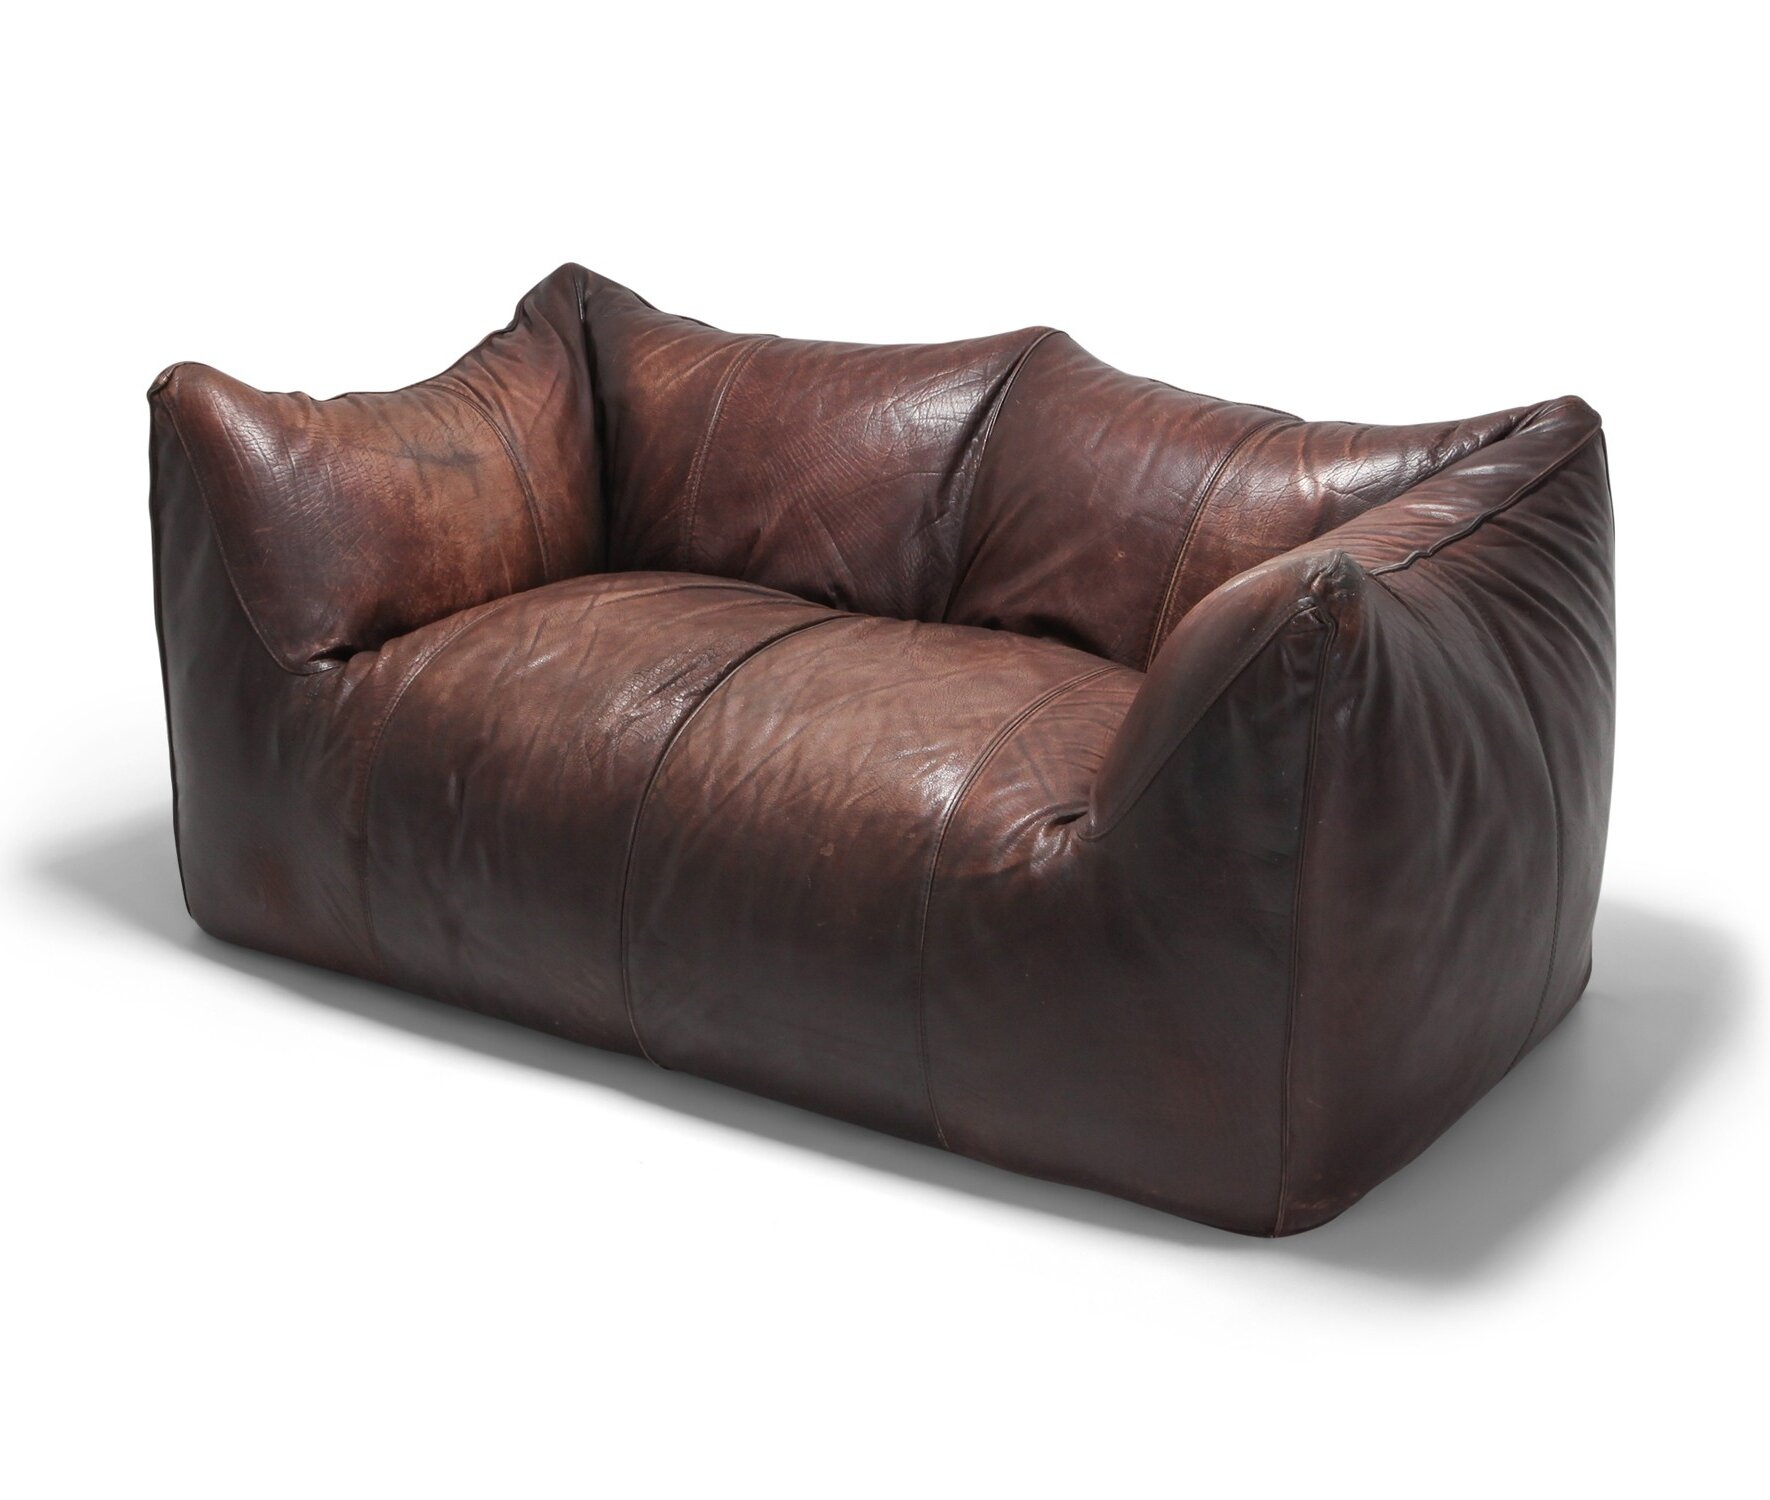 first-edition-bambole-in-brown-leather-by-mario-bellini-1970s.jpg